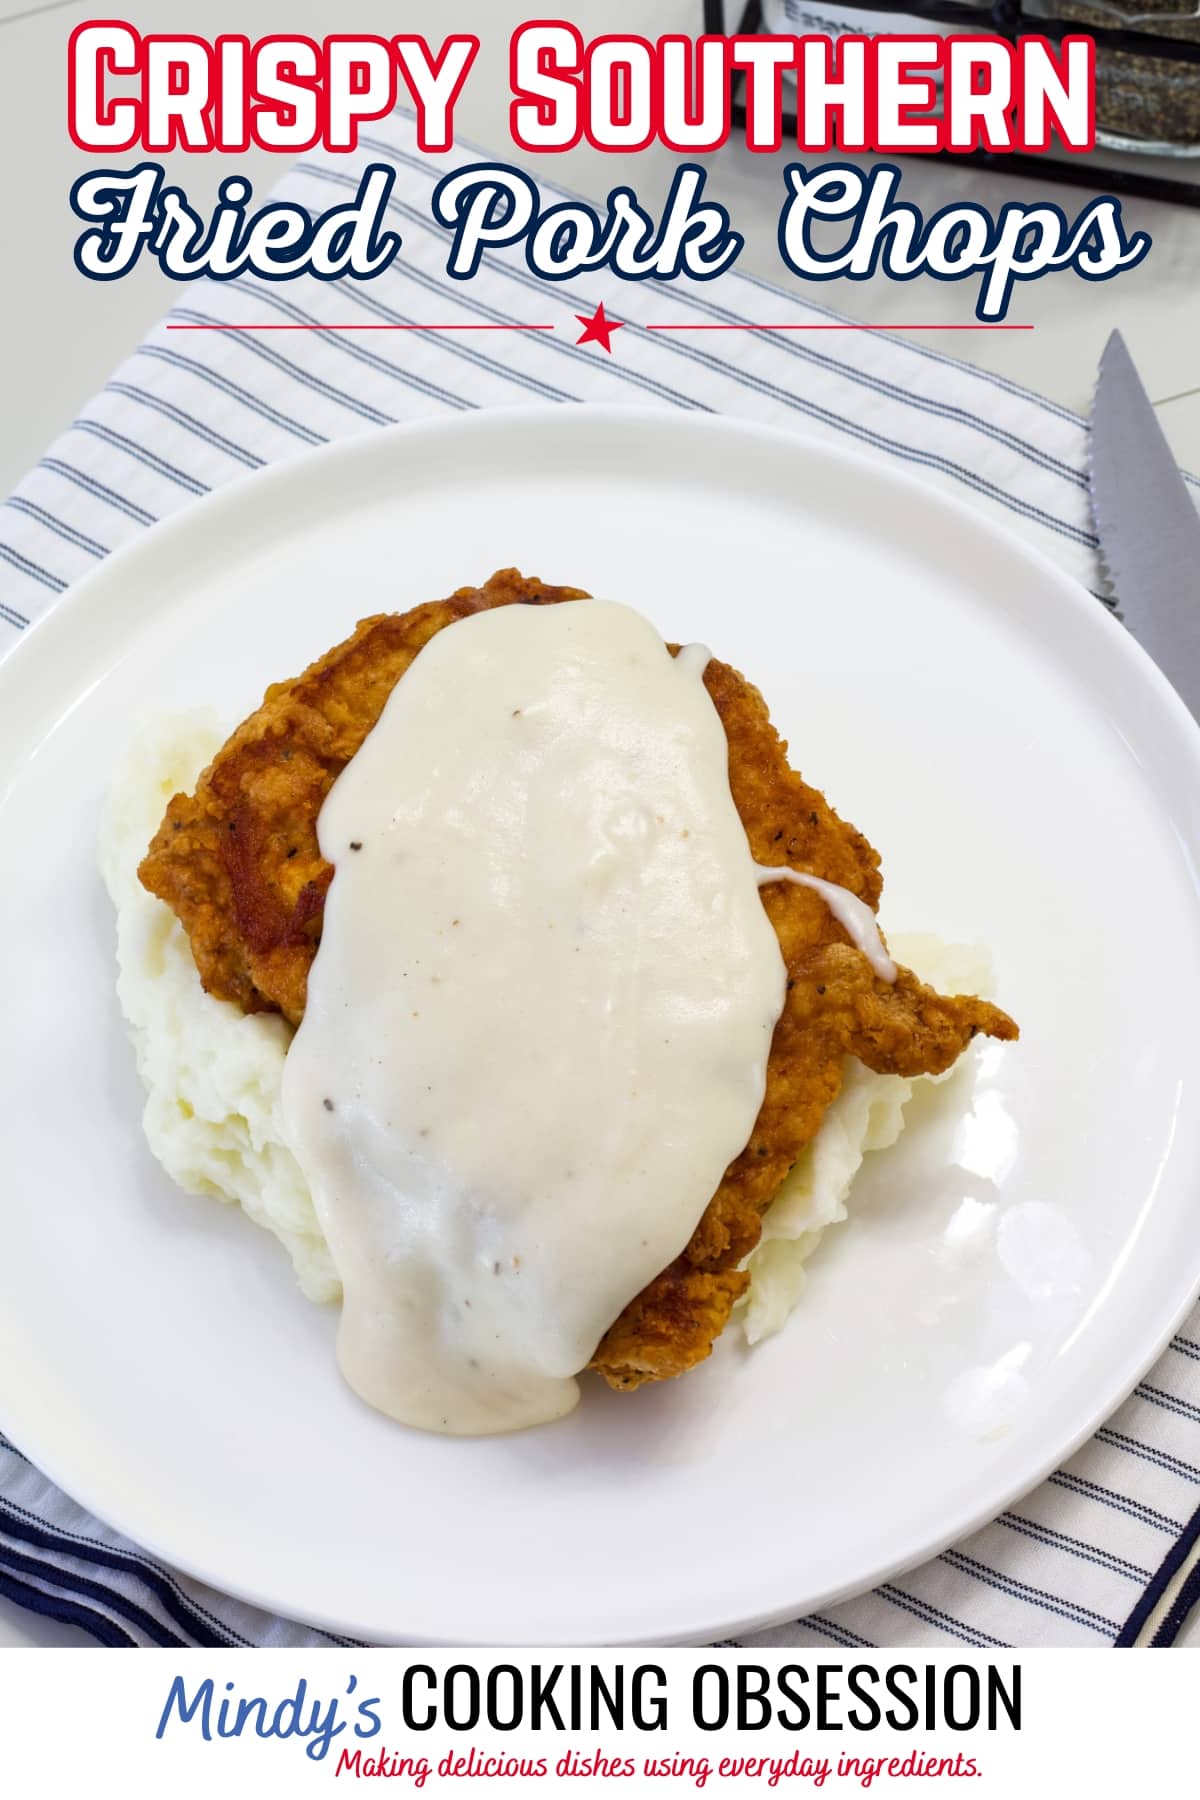 The Best Crispy Southern Fried Pork Chops Recipe - Boneless pork chops are breaded in flour and egg, fried then smothered in gravy. So good! via @mindyscookingobsession